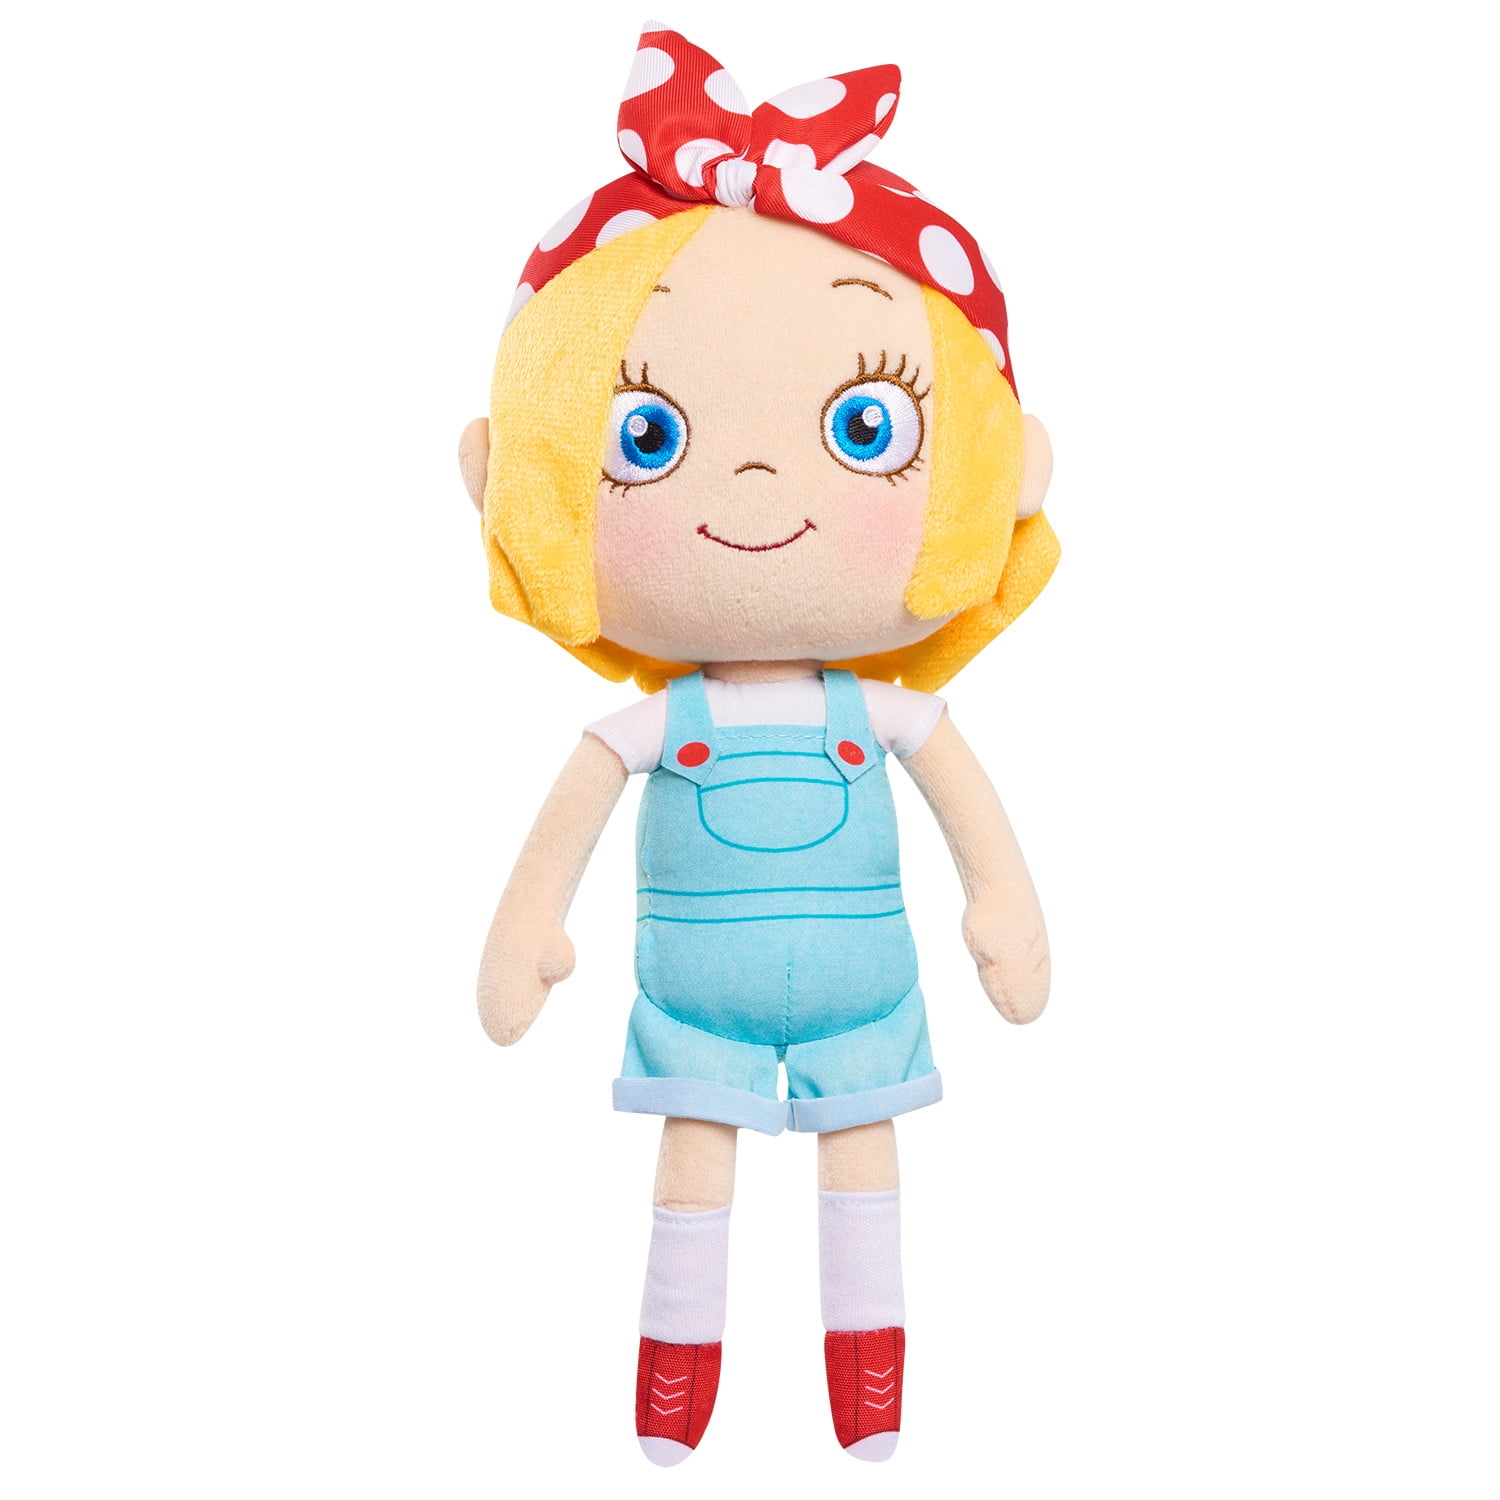 Ada Scientist Cuddle Time Rosie Revere 10.5 Inch Plush, Toys for Ages 2 Up, Gifts and Presents - Walmart.com